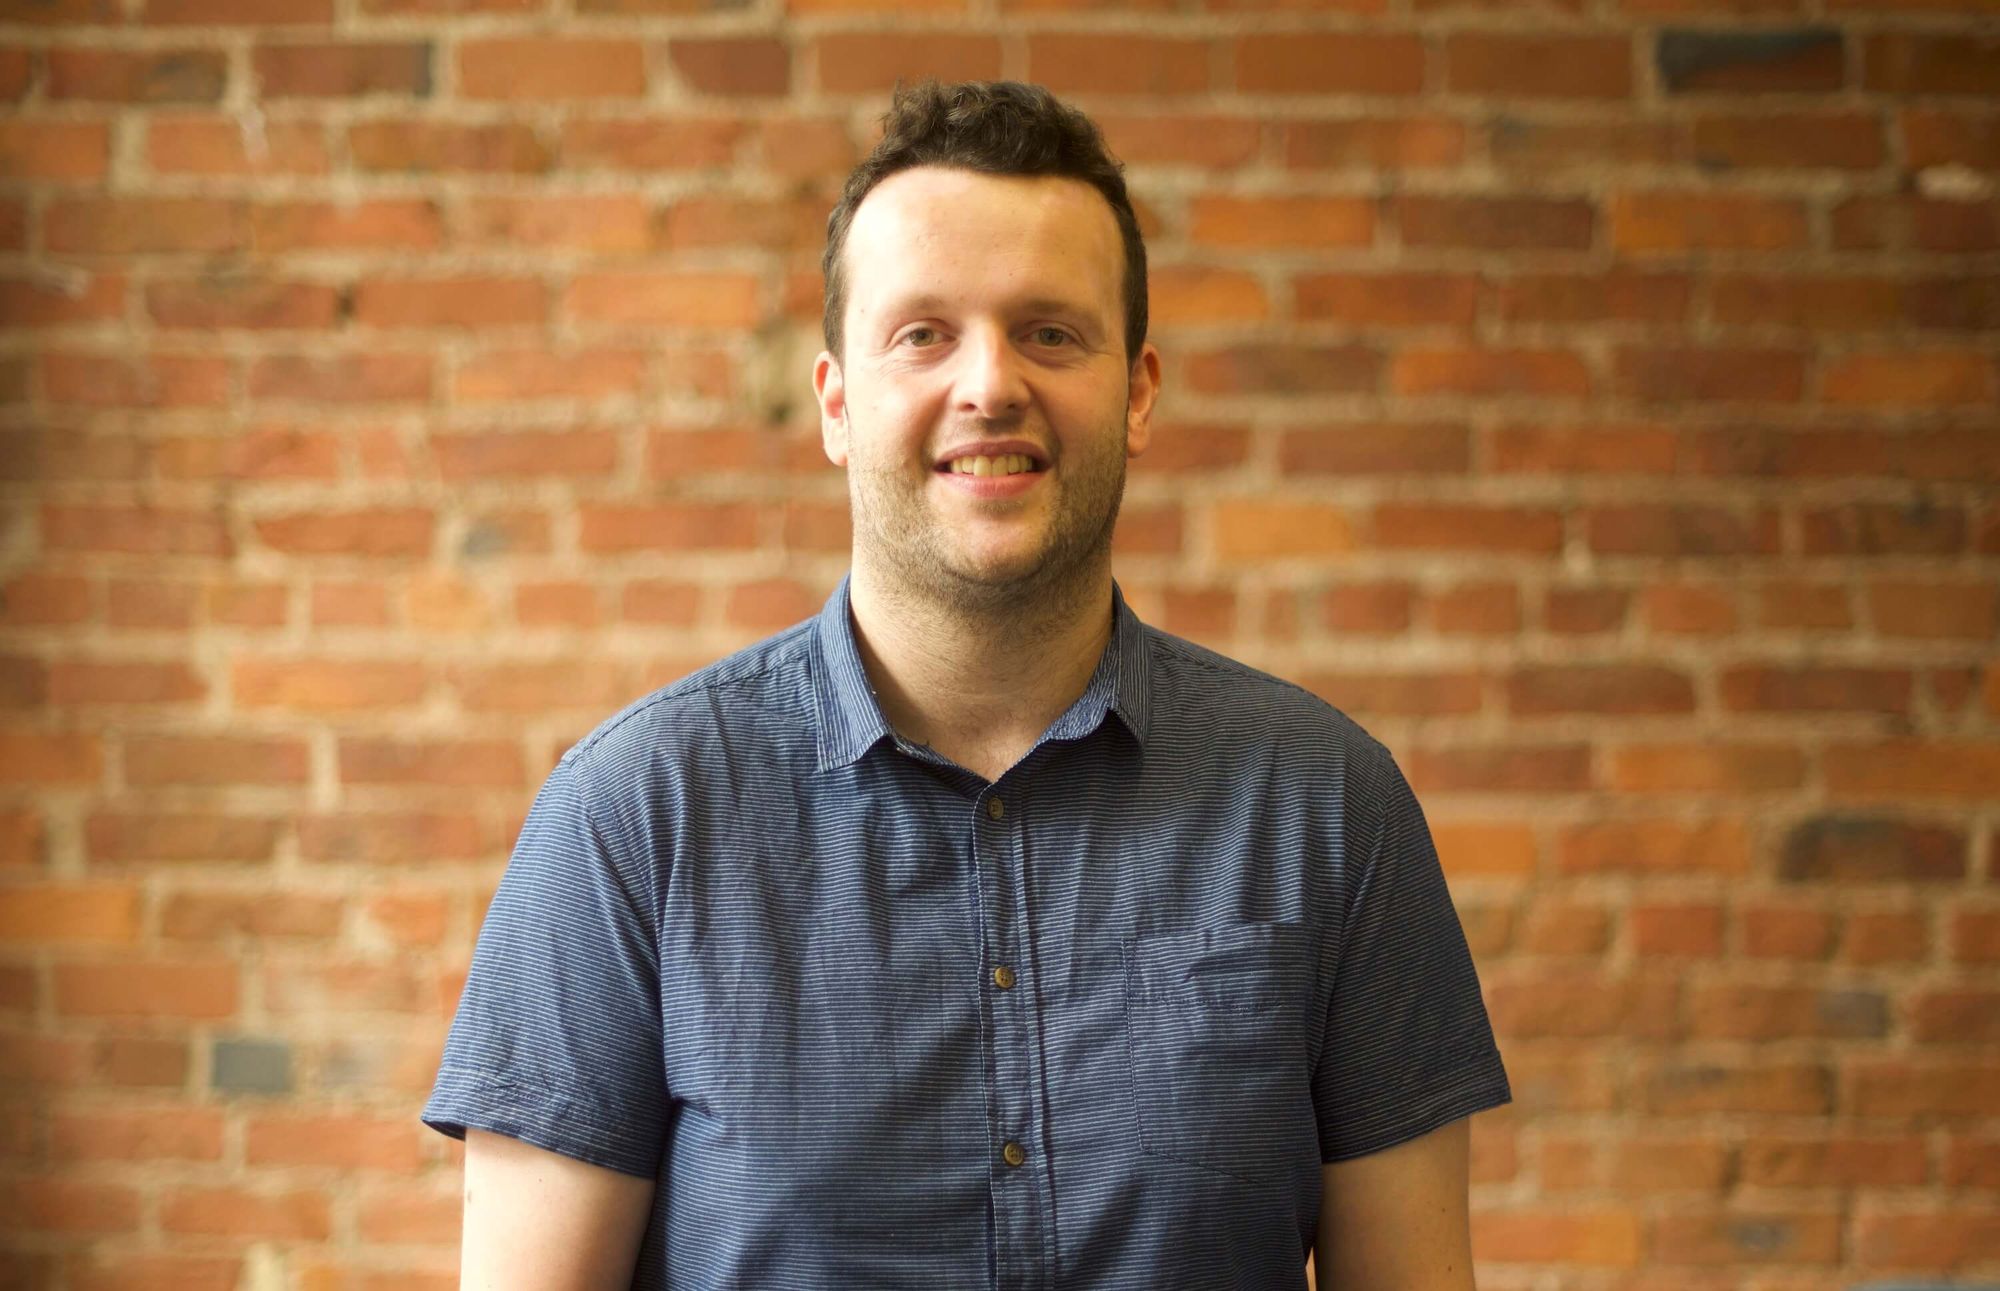 A Rowley good addition: Welcoming Jonathan Rowley to the RotaCloud team!